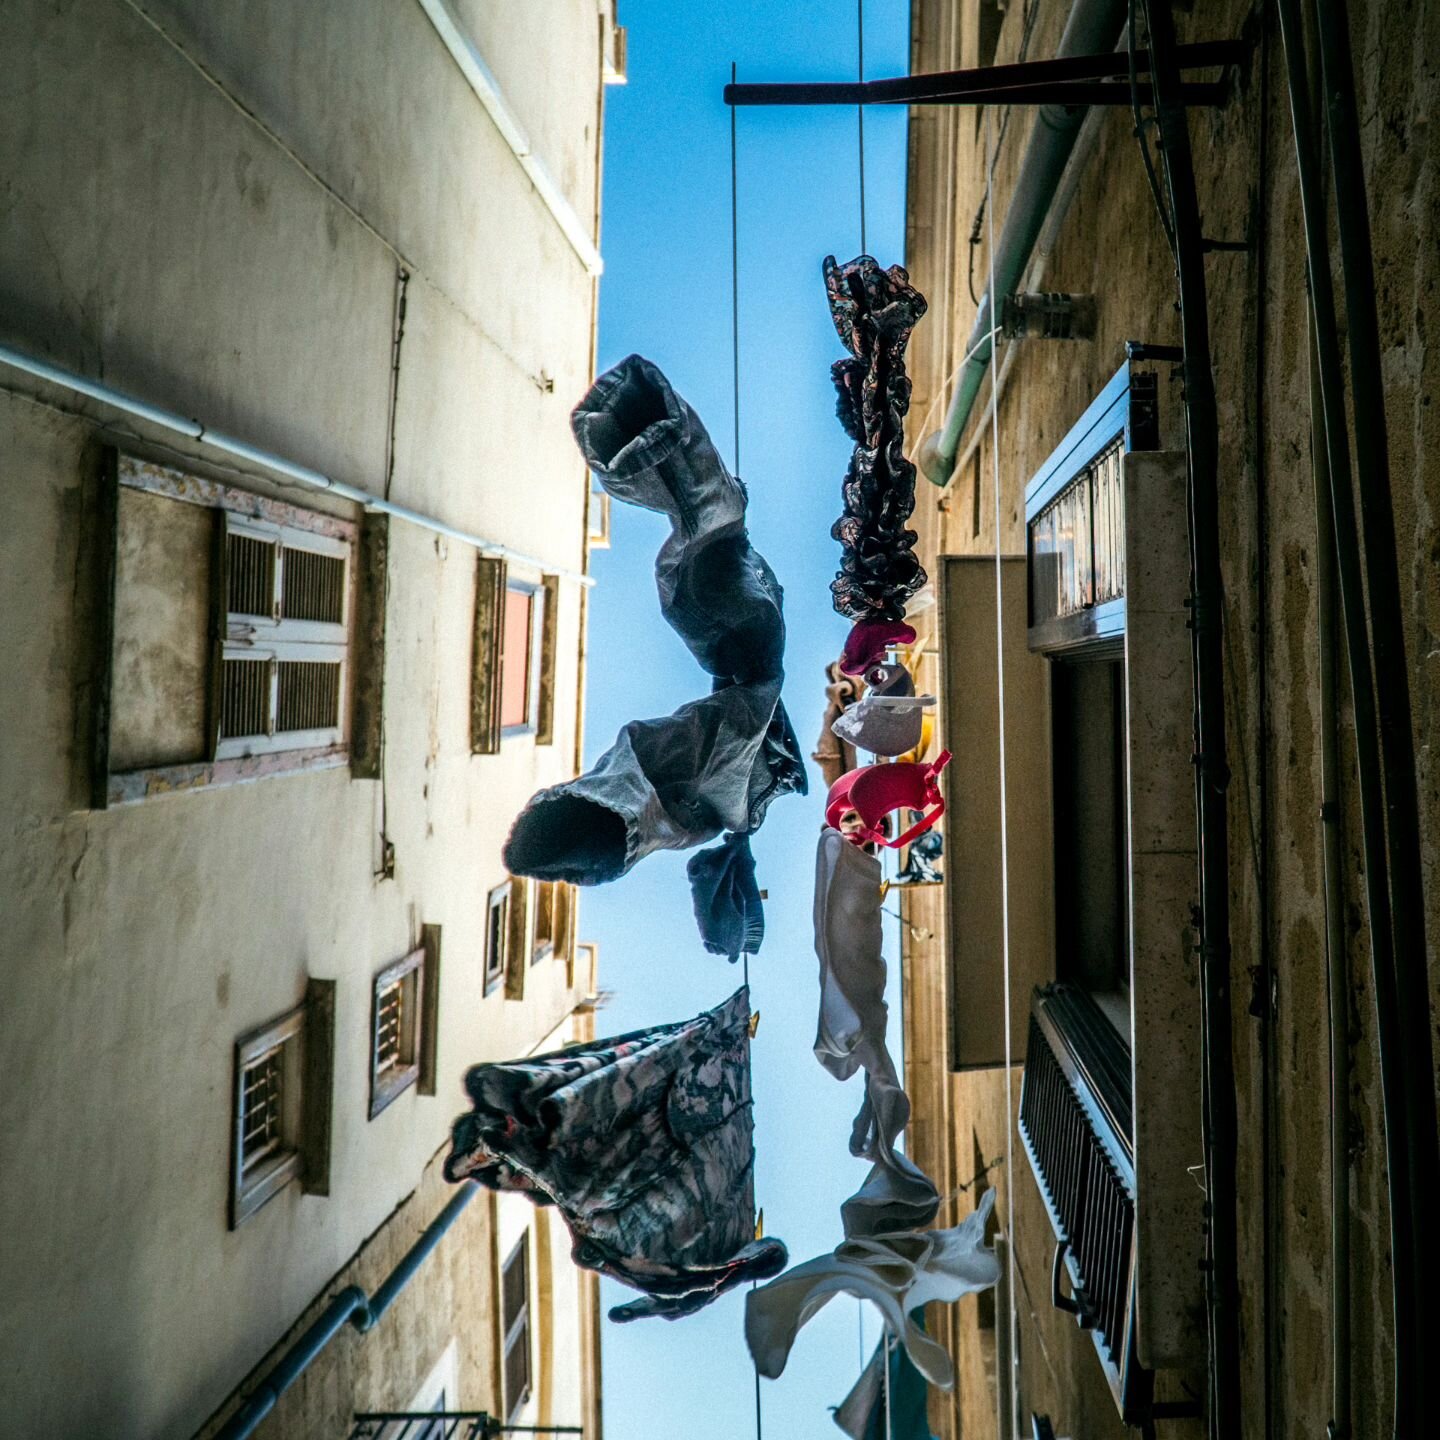 &quot;How's it hanging?&quot; - A very typical scene in Bari, Italia.